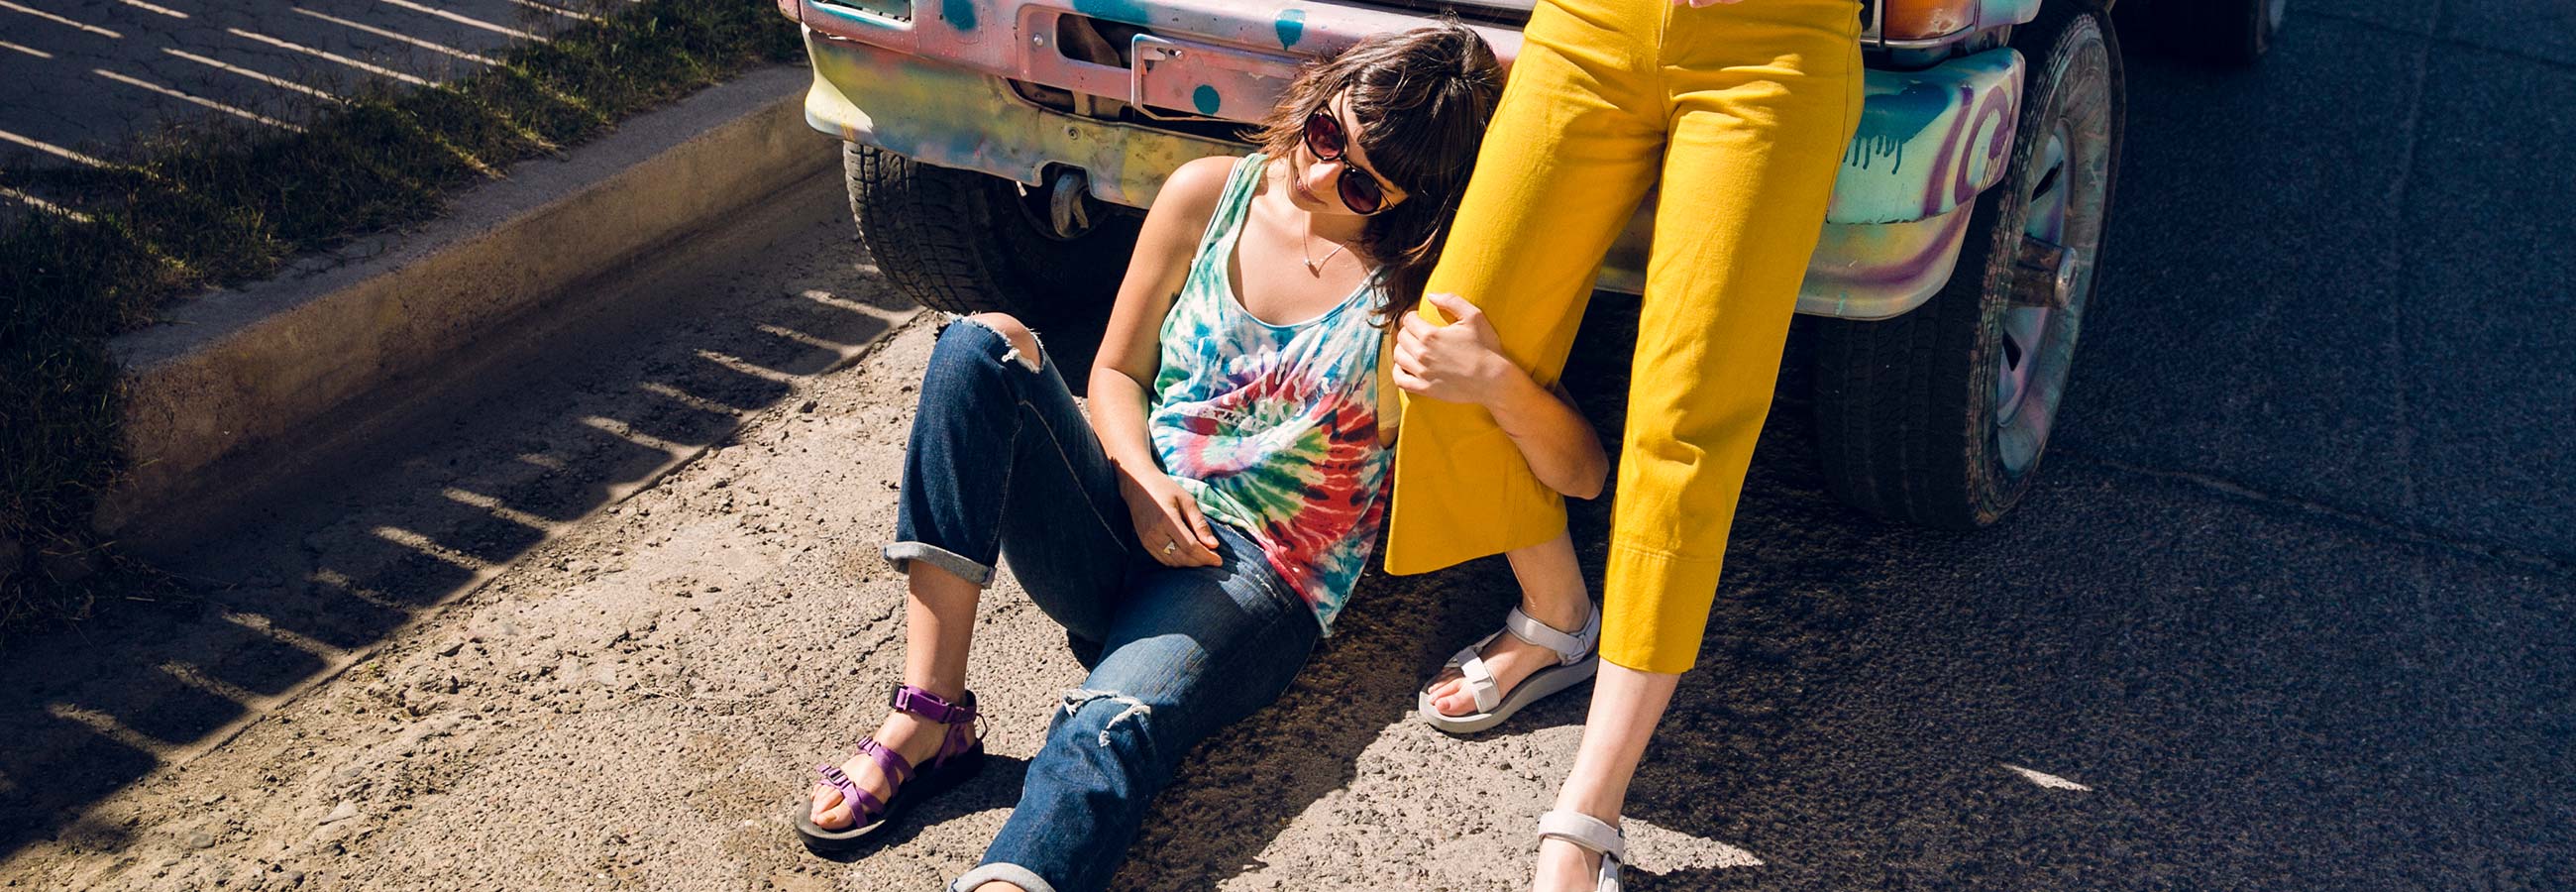 Two women leaning against a car wearing Teva sandals.